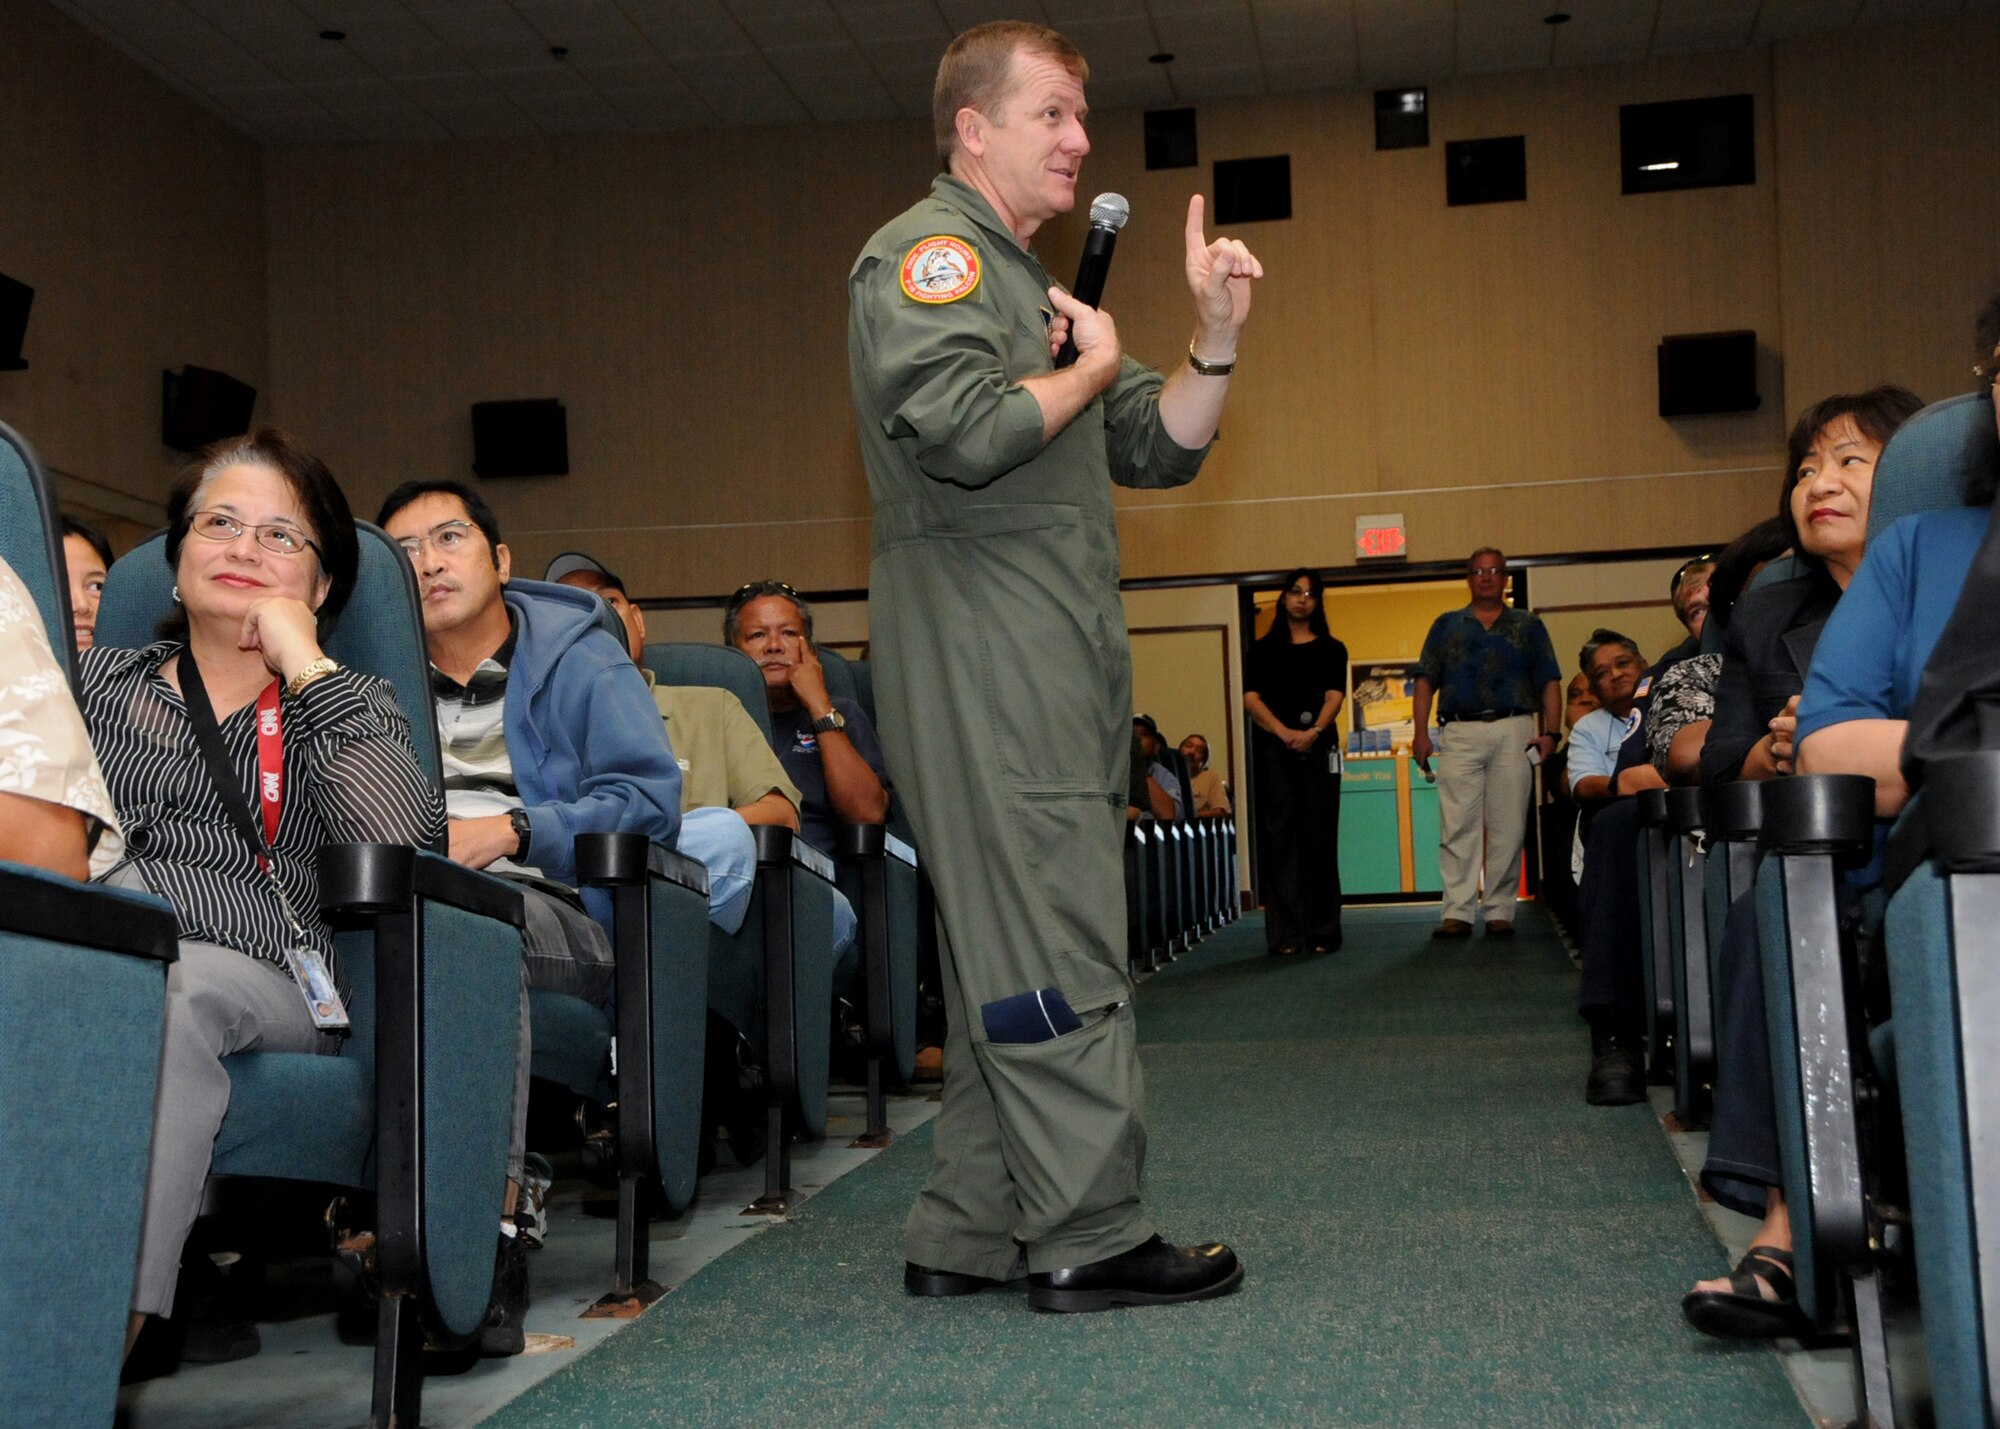 ANDERSEN AIR FORCE BASE, Guam - Brigadier Gen. Phil Ruhlman speaks to Air Force Civilians here Nov. 21 during a Town Hall Meeting about joint basing and the future for these soon to be Navy employees. (U.S. Air Force photo by Senior Airman Nichelle Griffiths)